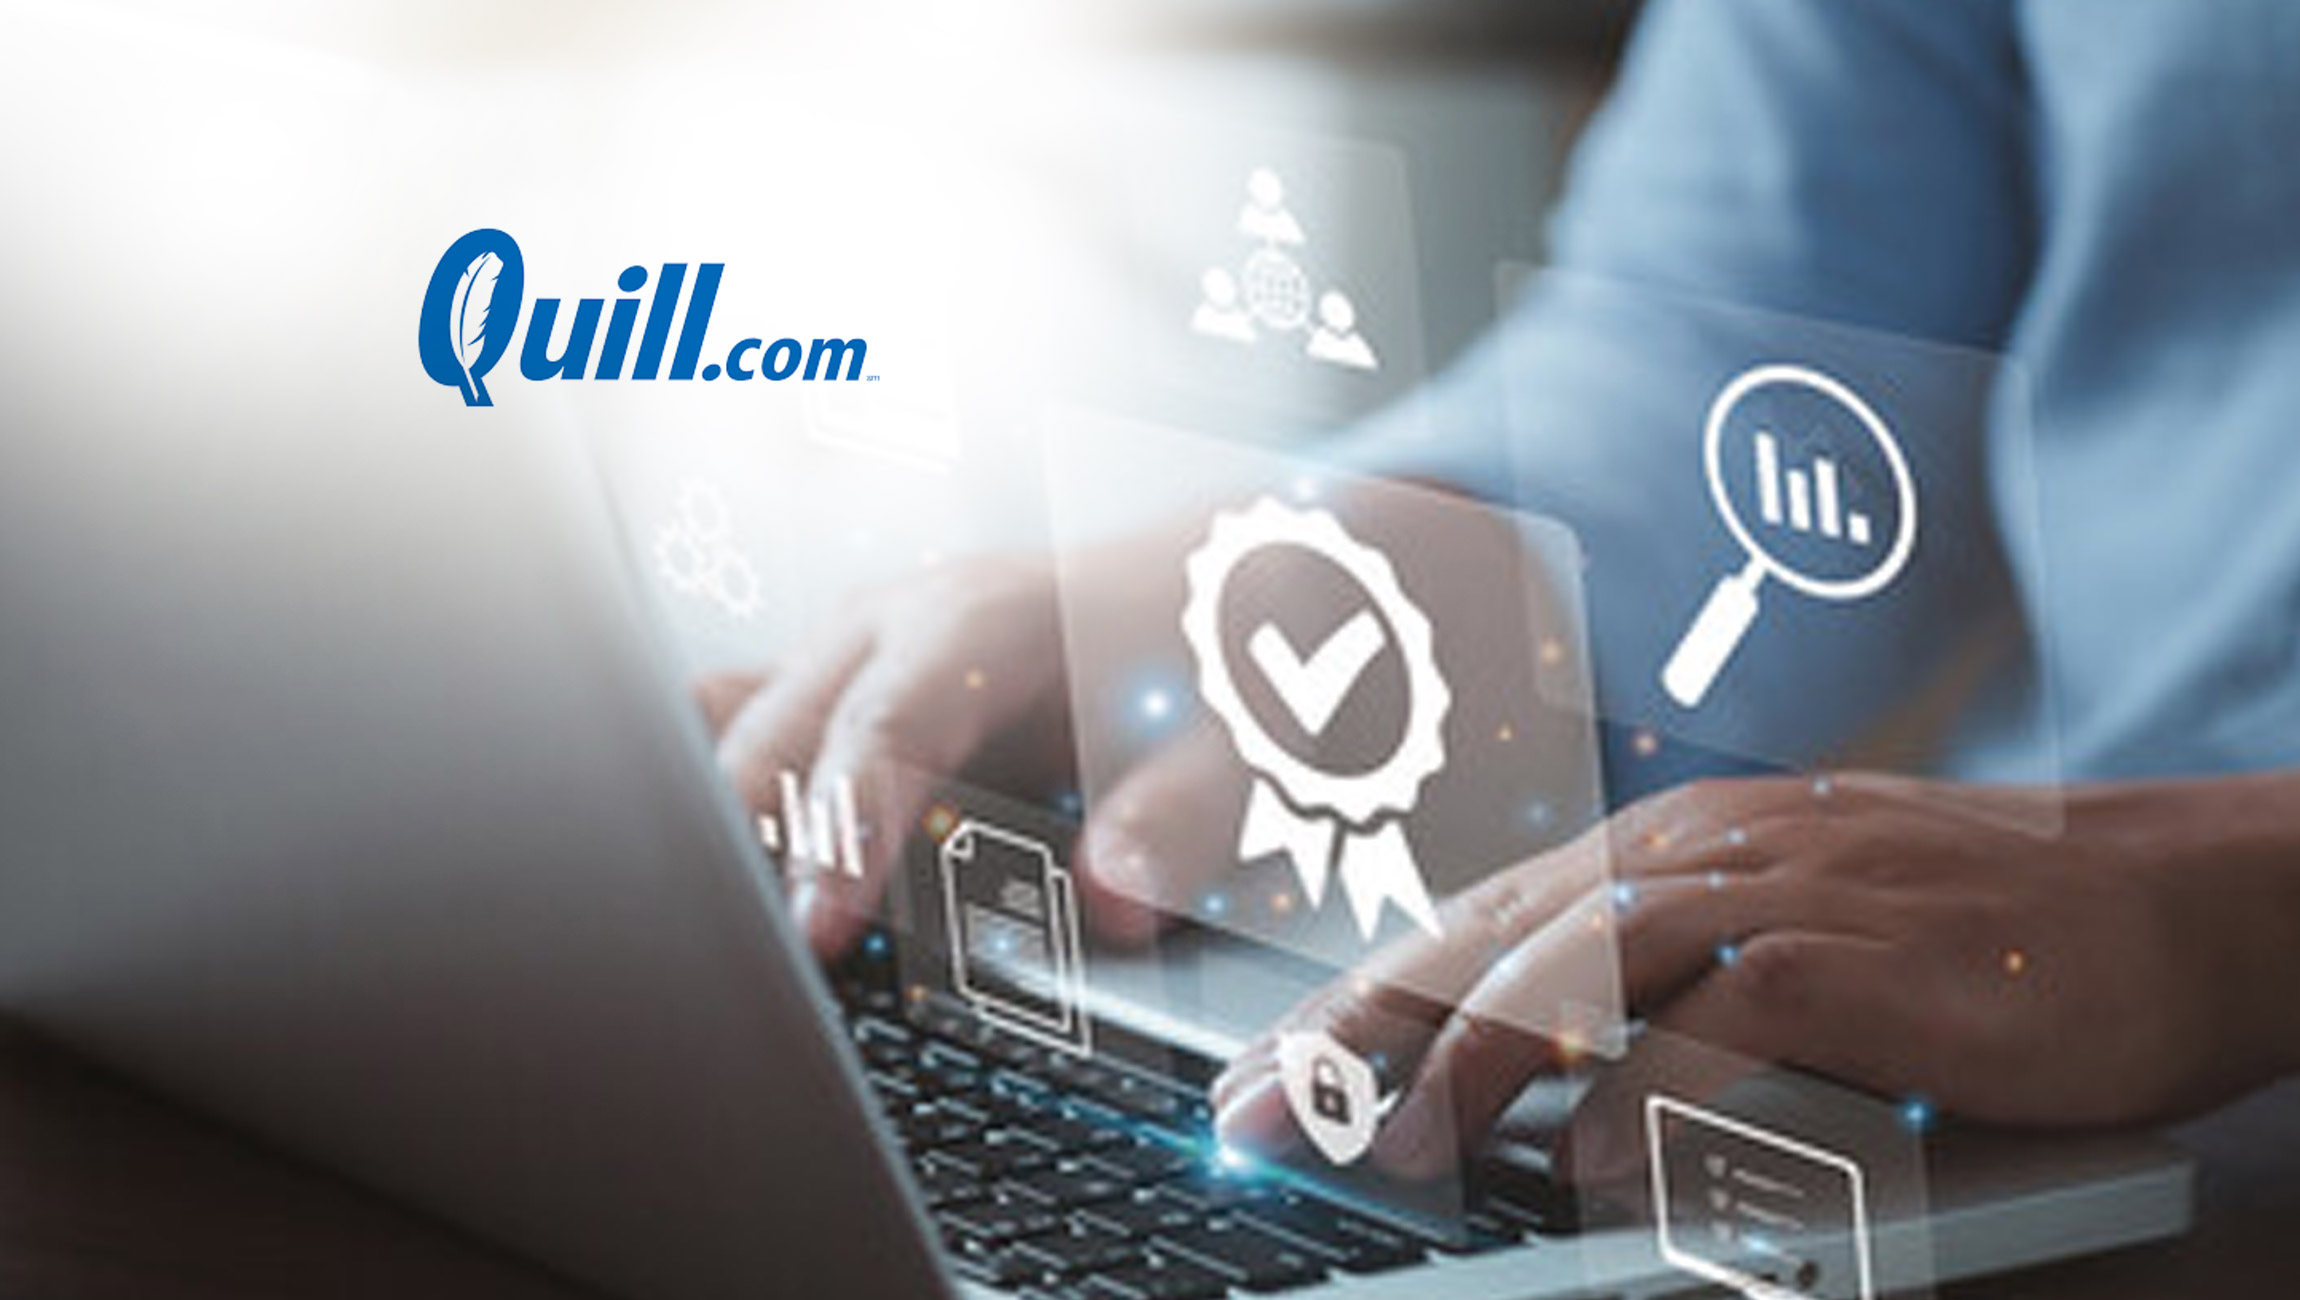 quill.com recognized as one of america's best customer service